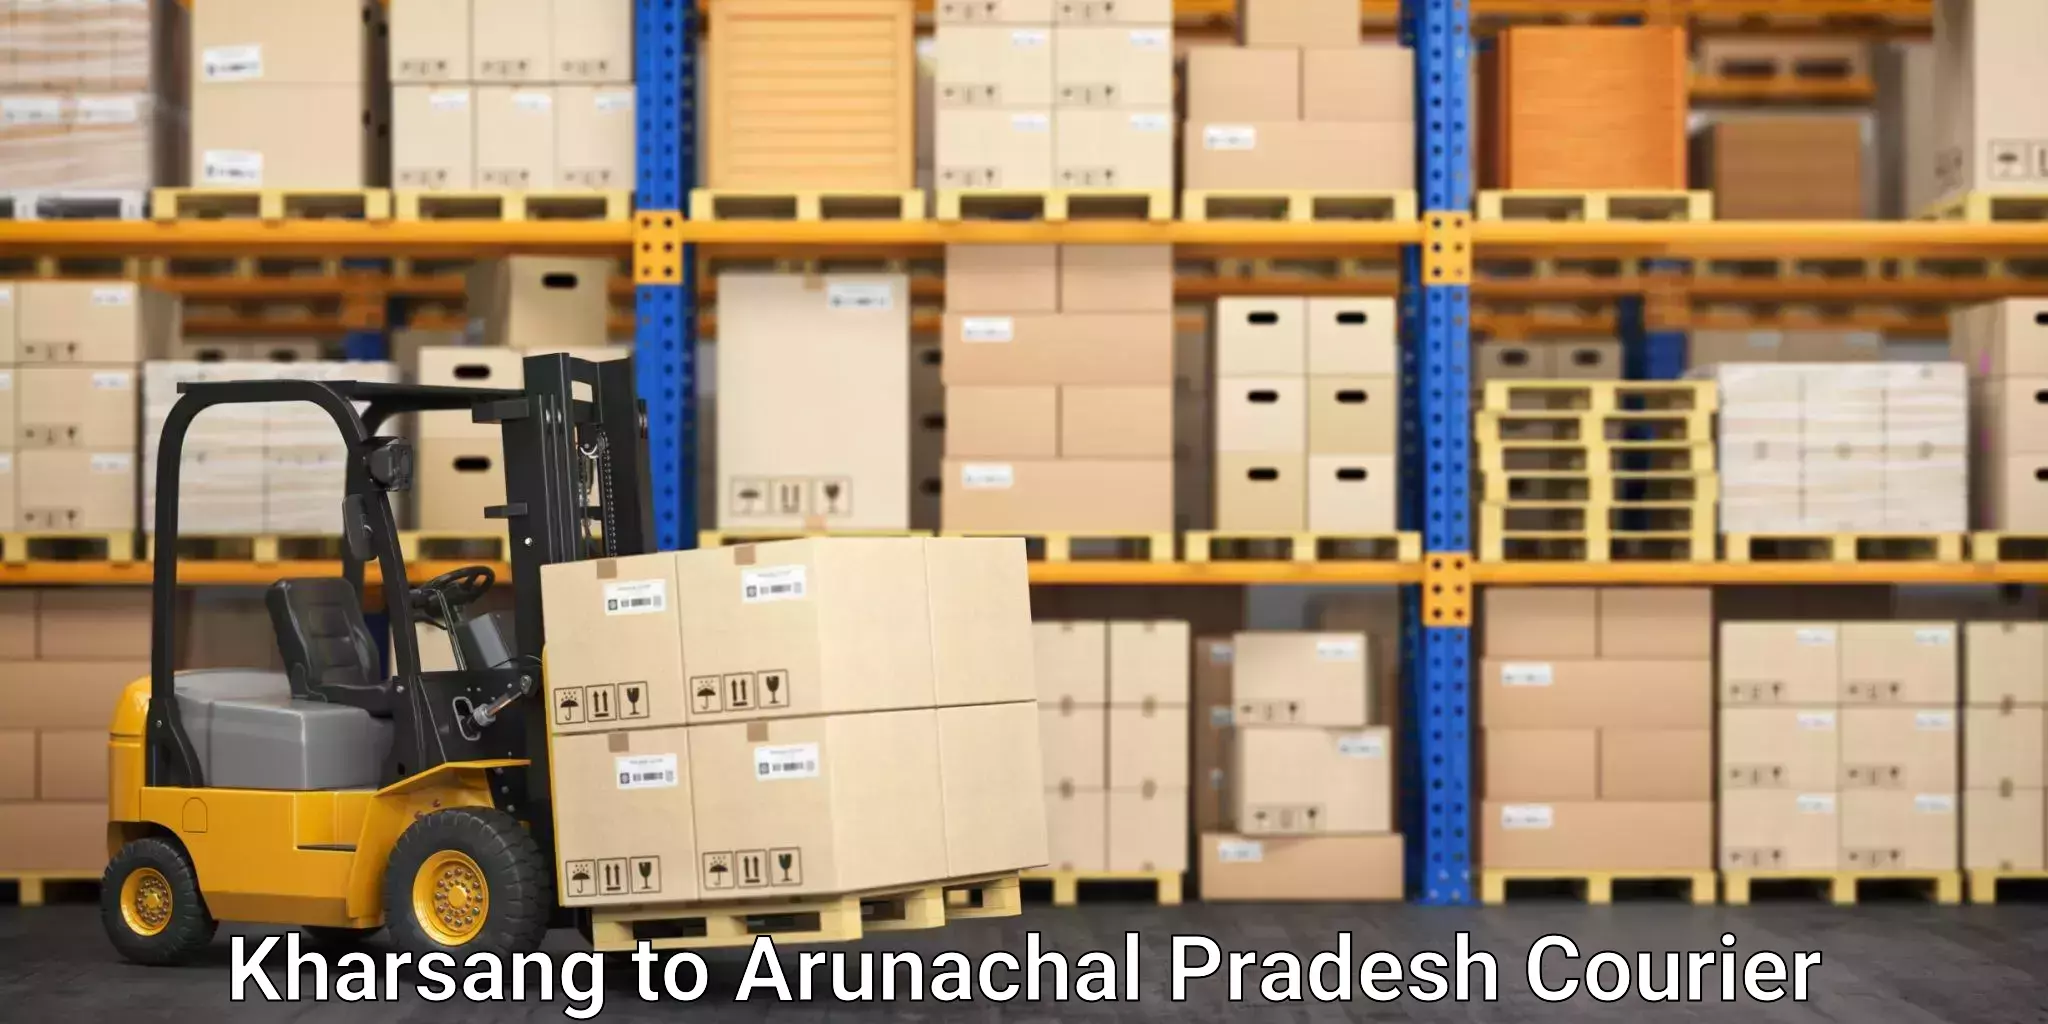 Reliable parcel services in Kharsang to Arunachal Pradesh